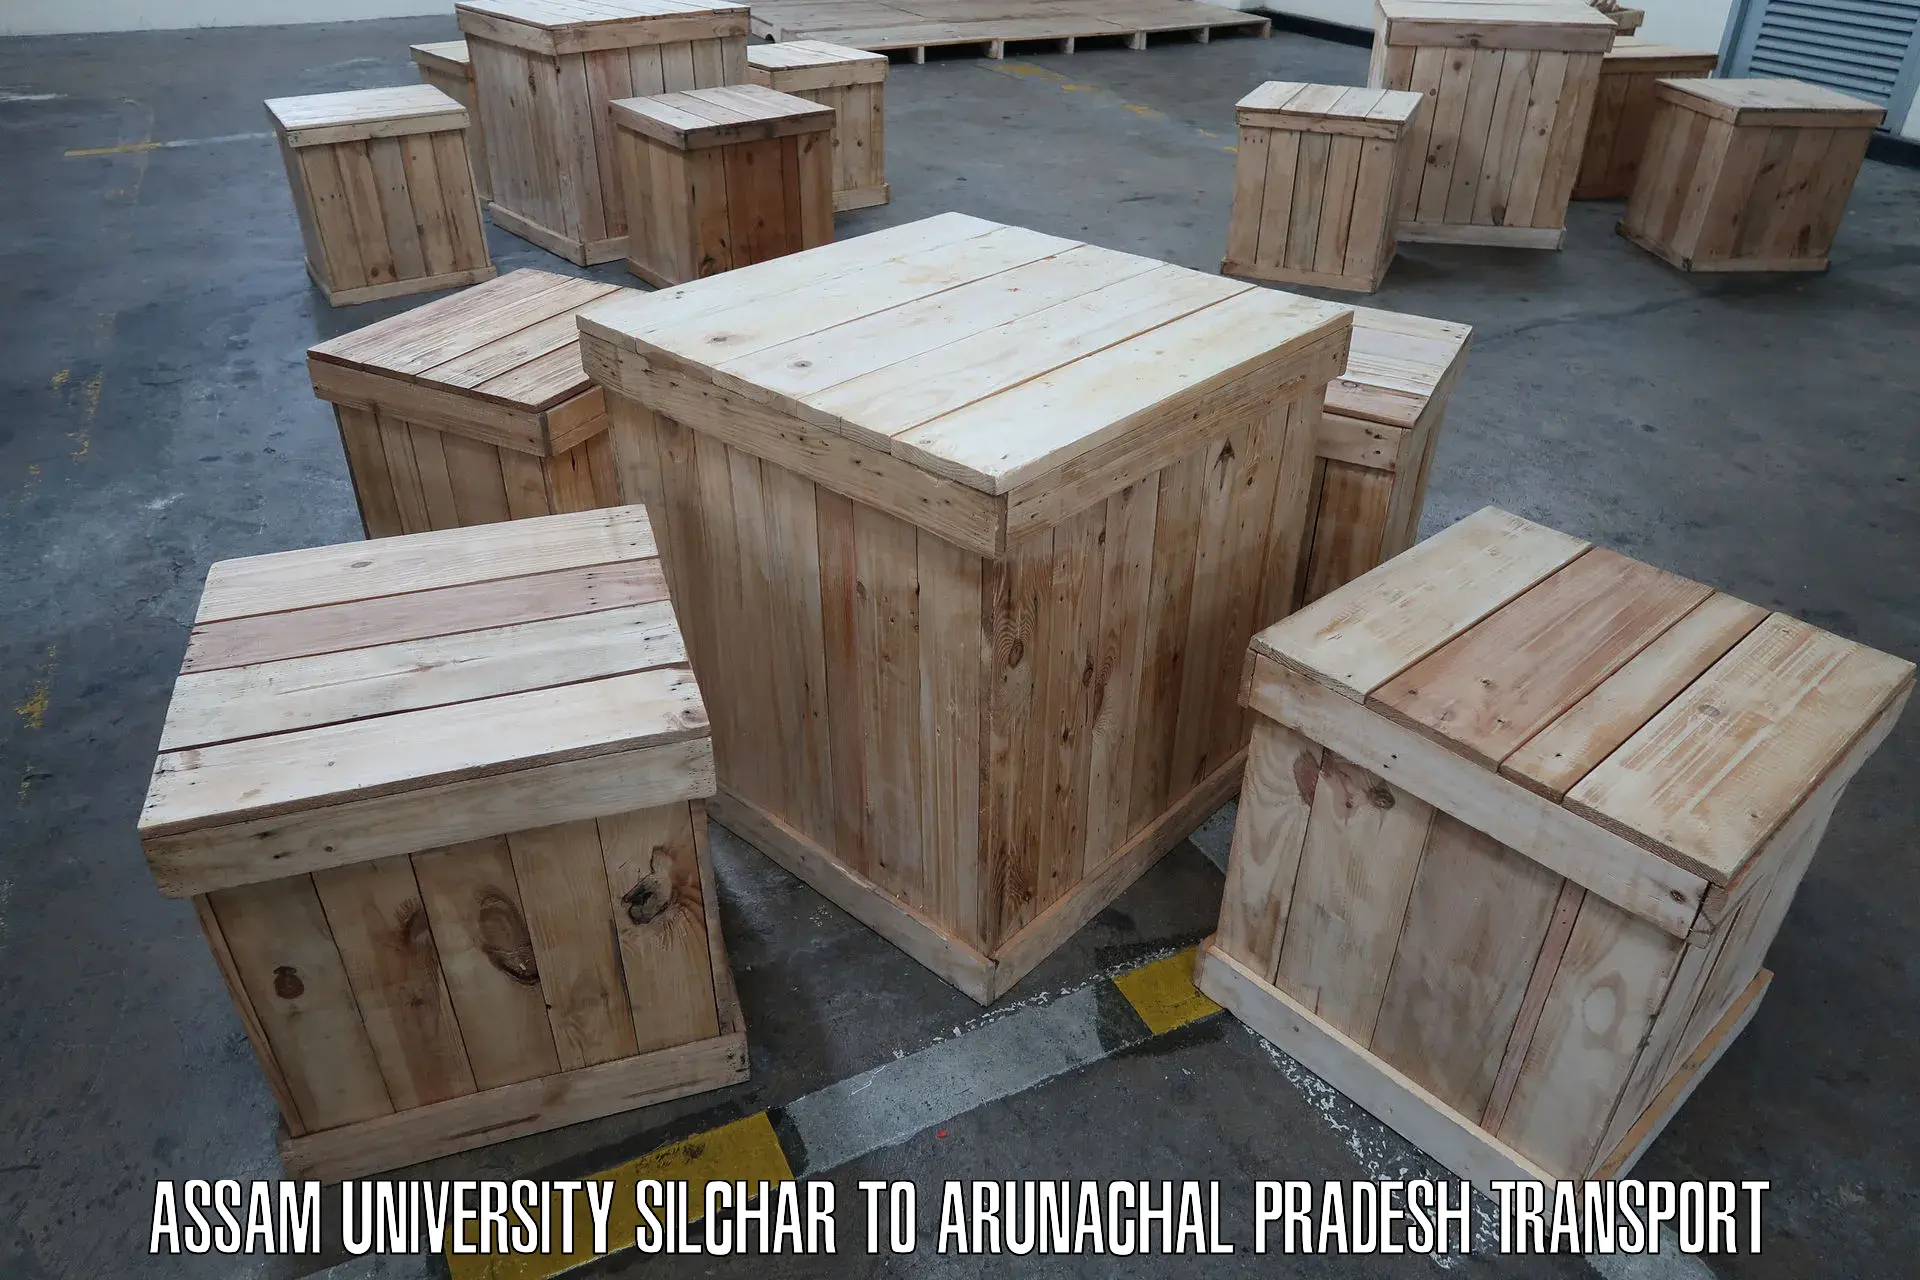 Truck transport companies in India Assam University Silchar to Changlang